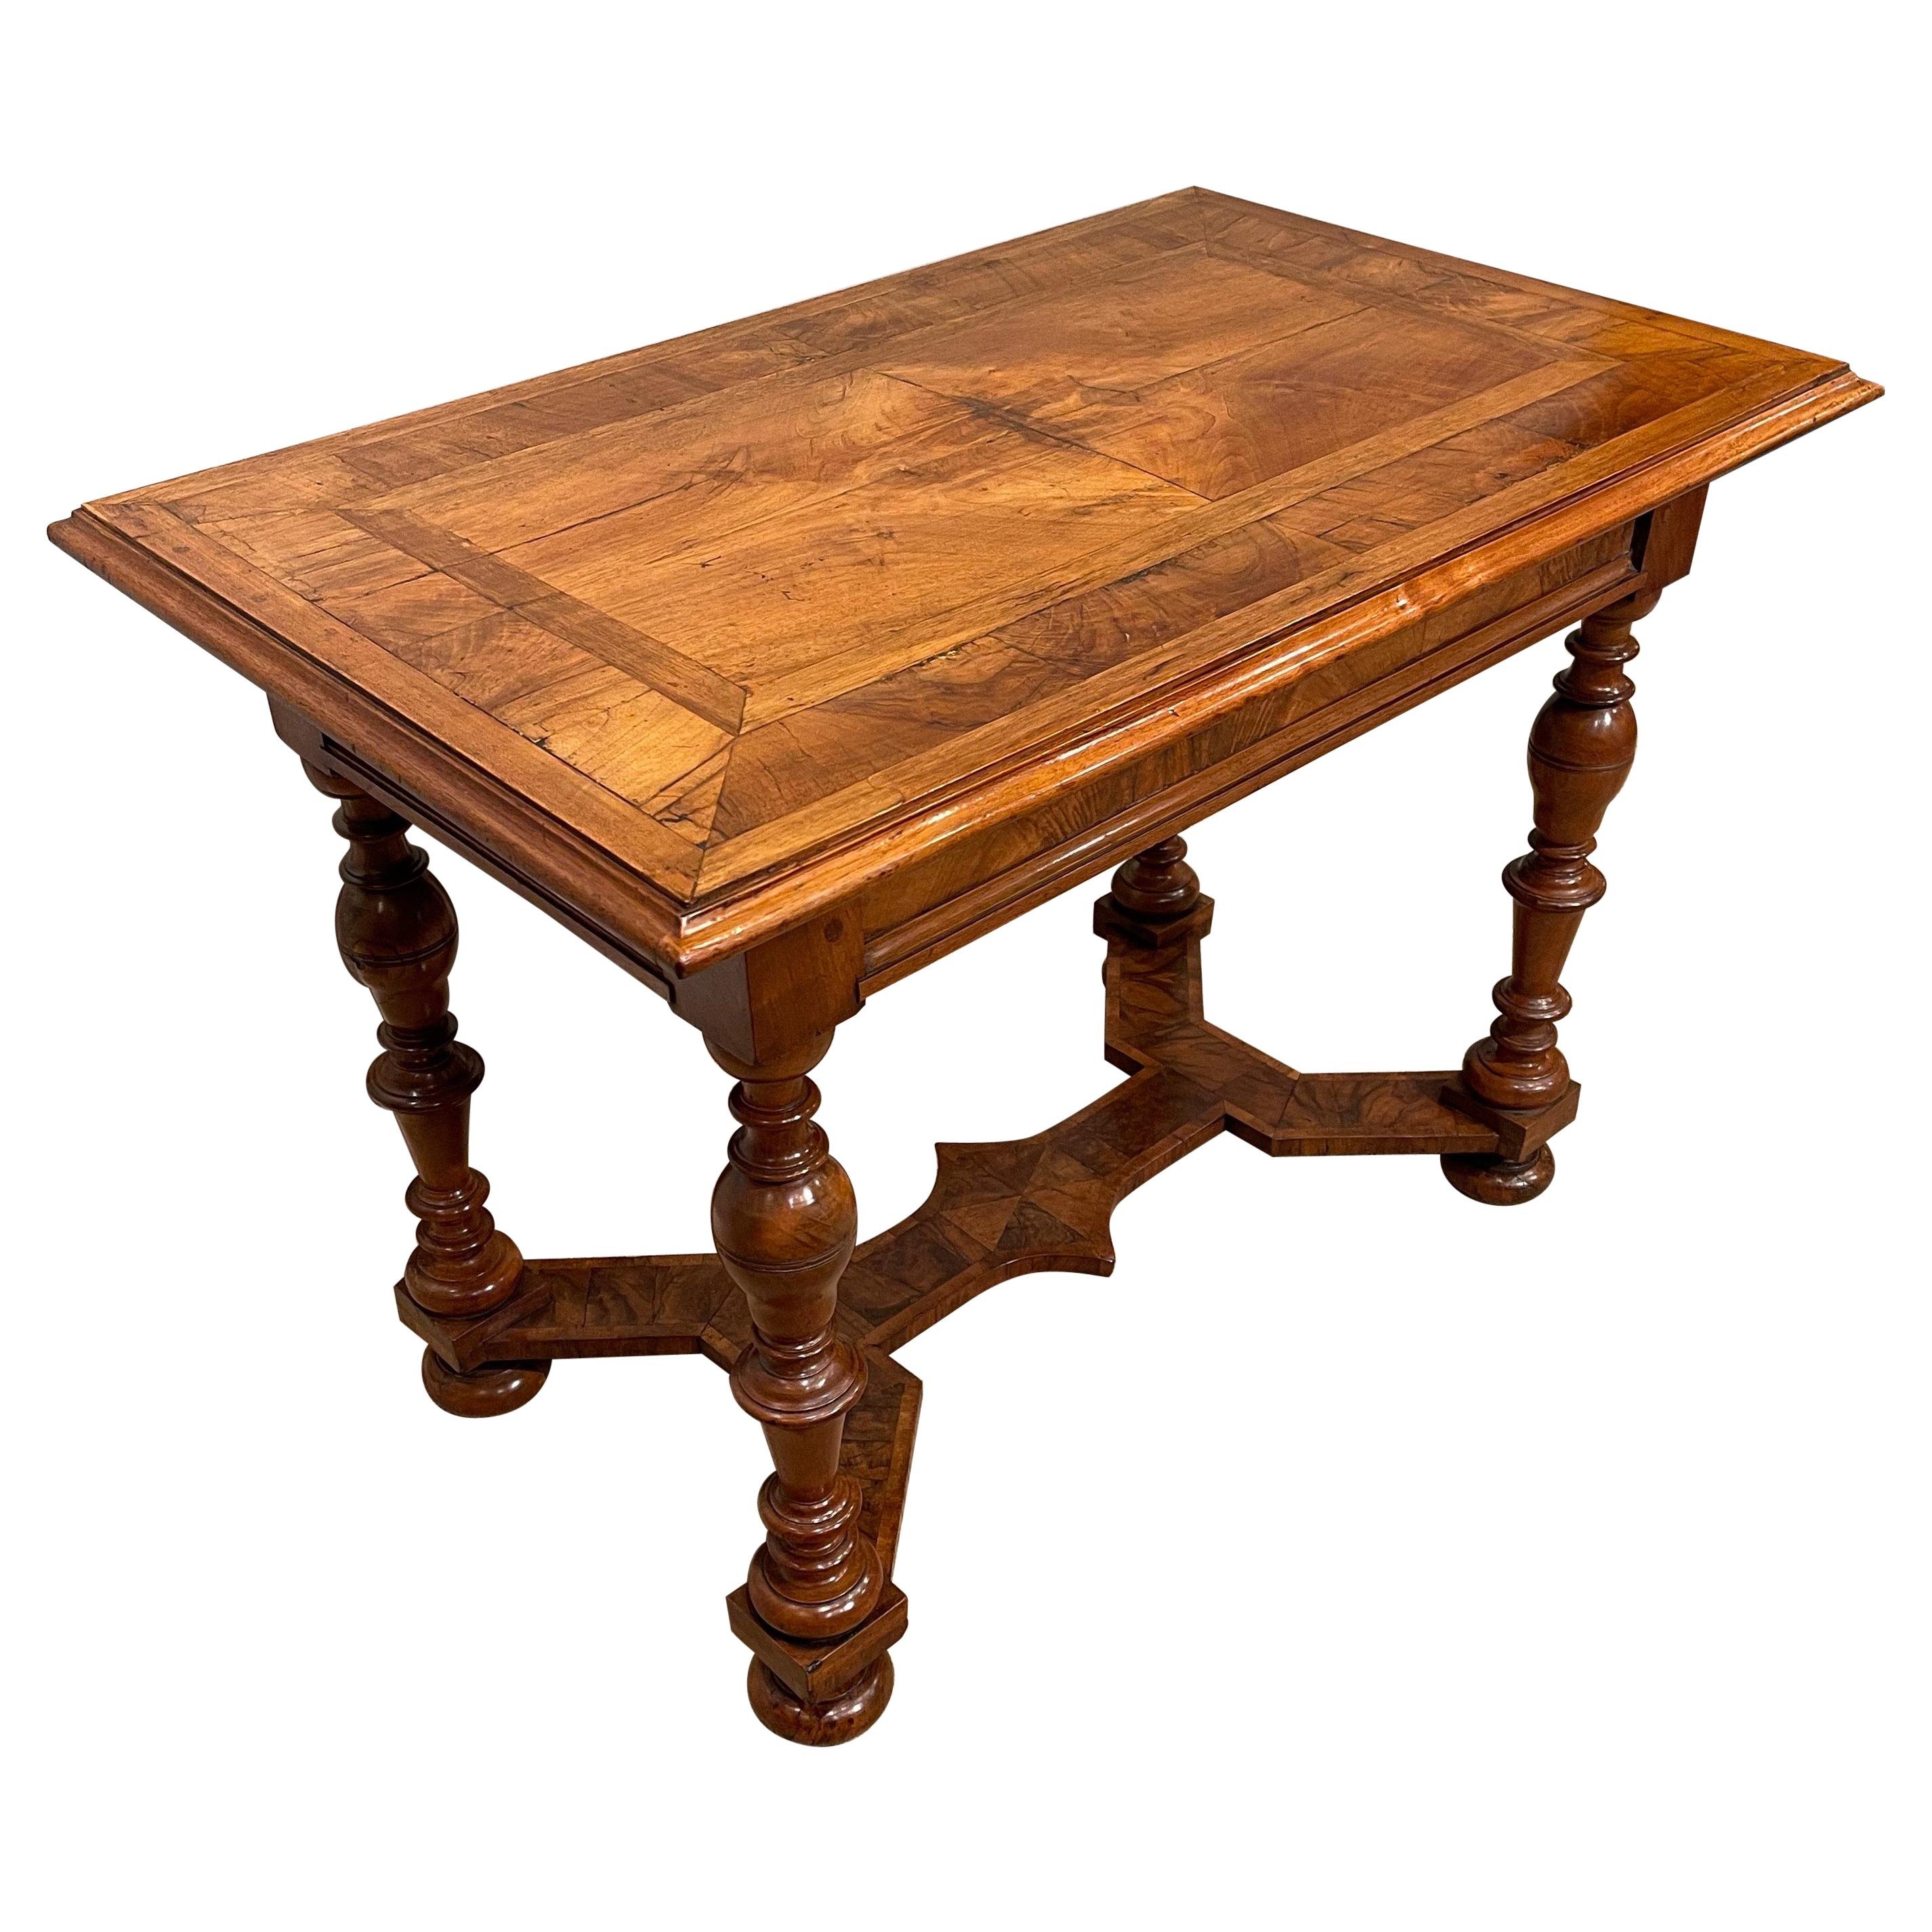 Turned Walnut Center Table, Late 17th Century